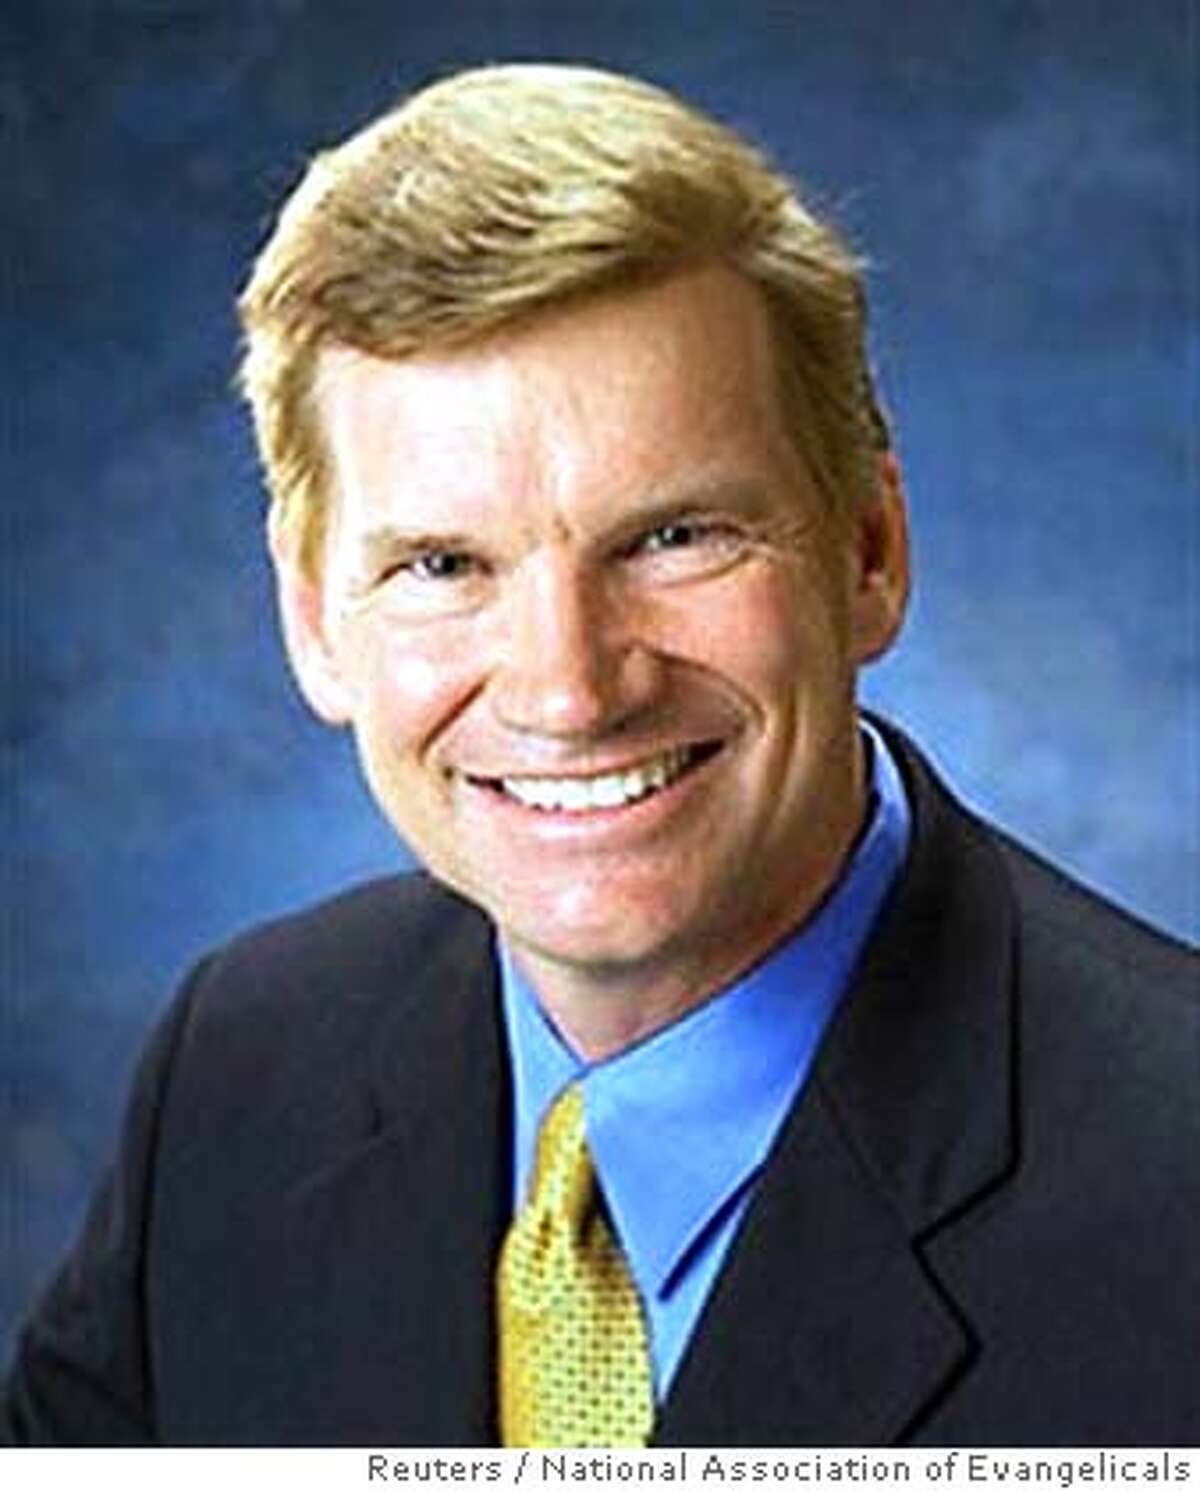 Ted Haggard, the president of the U.S. National Association of Evangelicals, is pictured in this undated photograph. Haggard resigned on November 2, 2006 after being accused of having a sexual relationship with a male escort. Haggard, who denied the accusation, also temporarily stepped down as senior pastor of the New Life Church in Colorado Springs, the church said in a statement. NO ARCHIVES REUTERS/National Association of Evangelicals/Handout (UNITED STATES) Ran on: 11-06-2006 Naomi Robb (right) and other members of New Life Church in Colorado Springs pray at services. Ran on: 11-06-2006 ALSO Ran on: 12-17-2006 Bobby: The vote among movie critics is split.